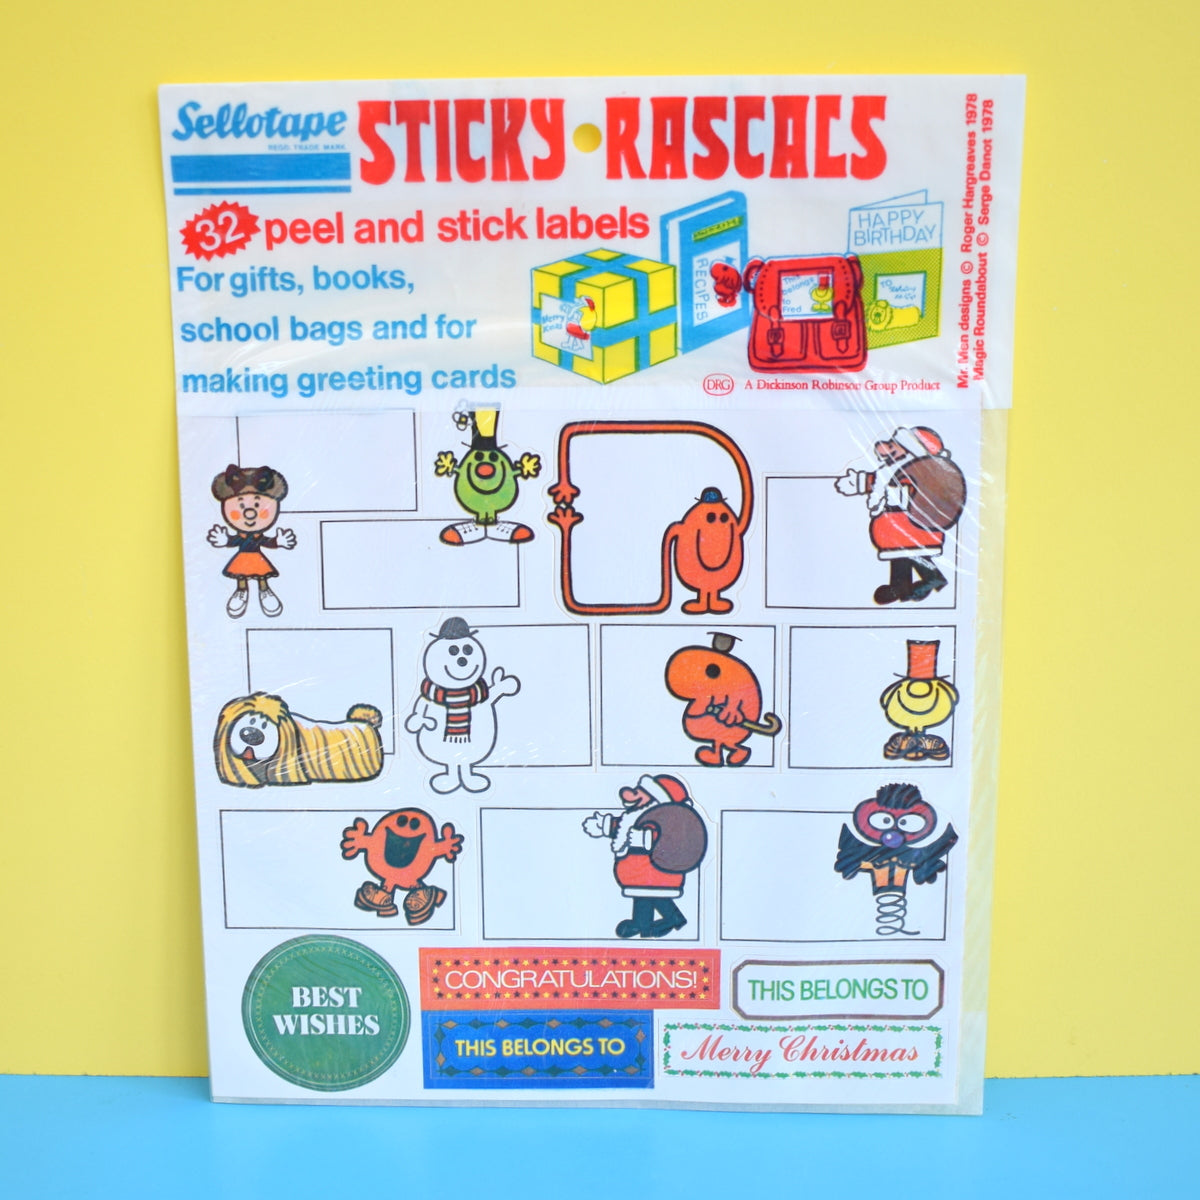 Vintage 1970s Mr Men / Magic Roundabout Gift Stickers / Labels - Sticky Rascals (32 Per Pack)